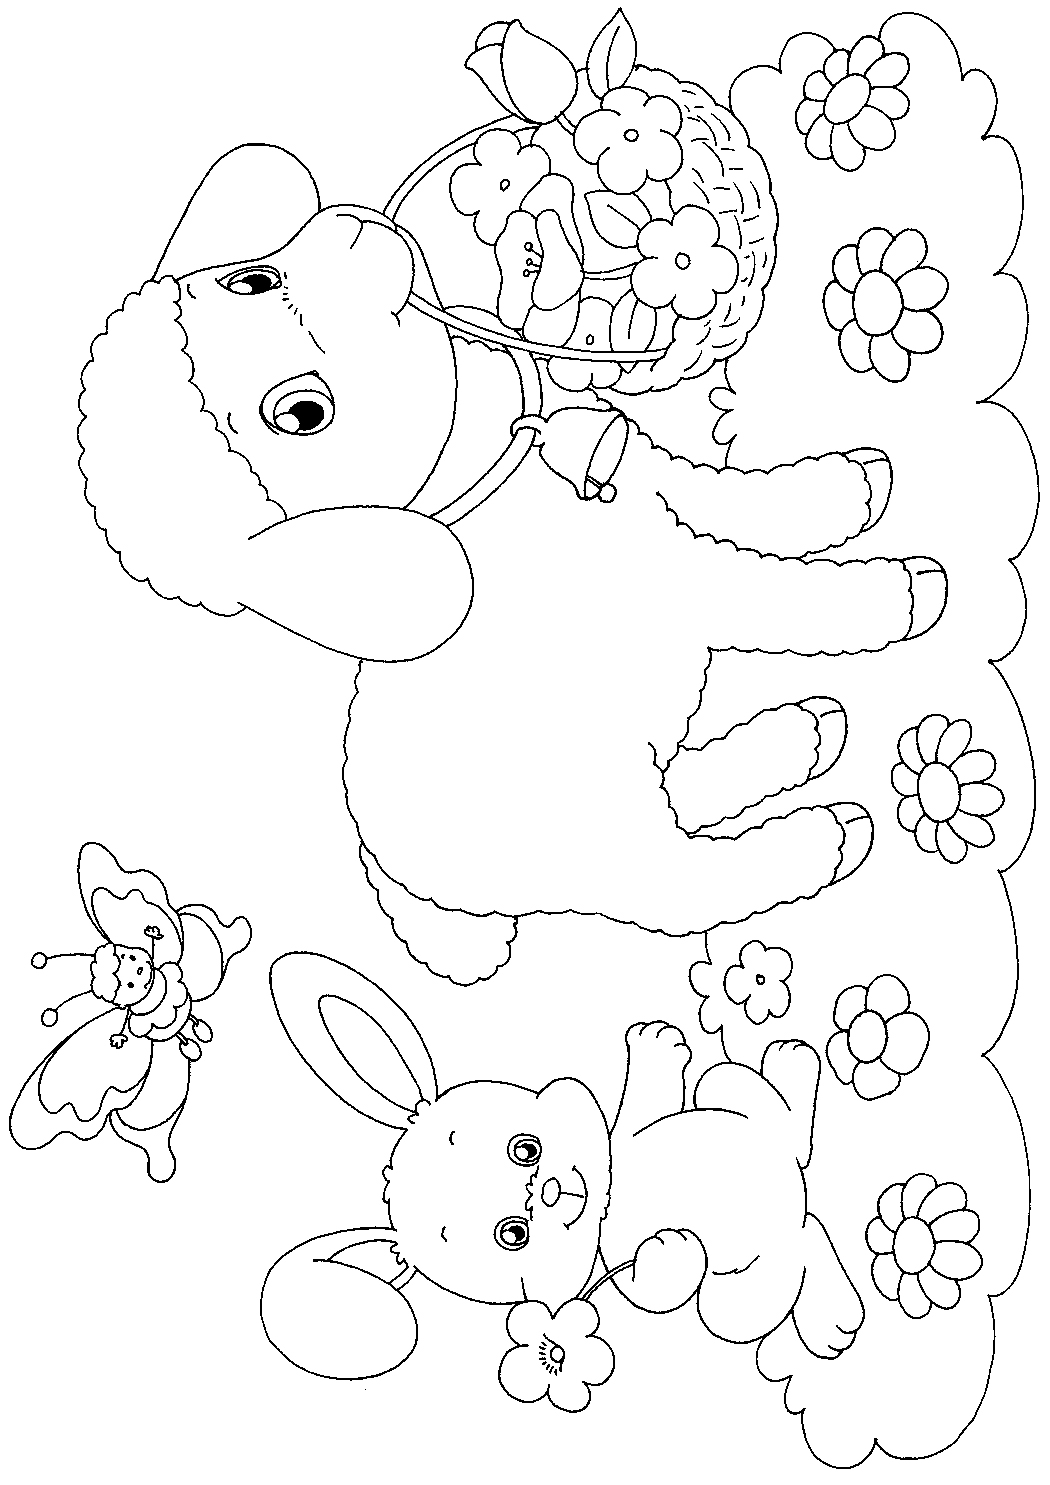 Download EASTER COLOURING: EASTER PAPER CRAFT TO PRINT AND COLOUR